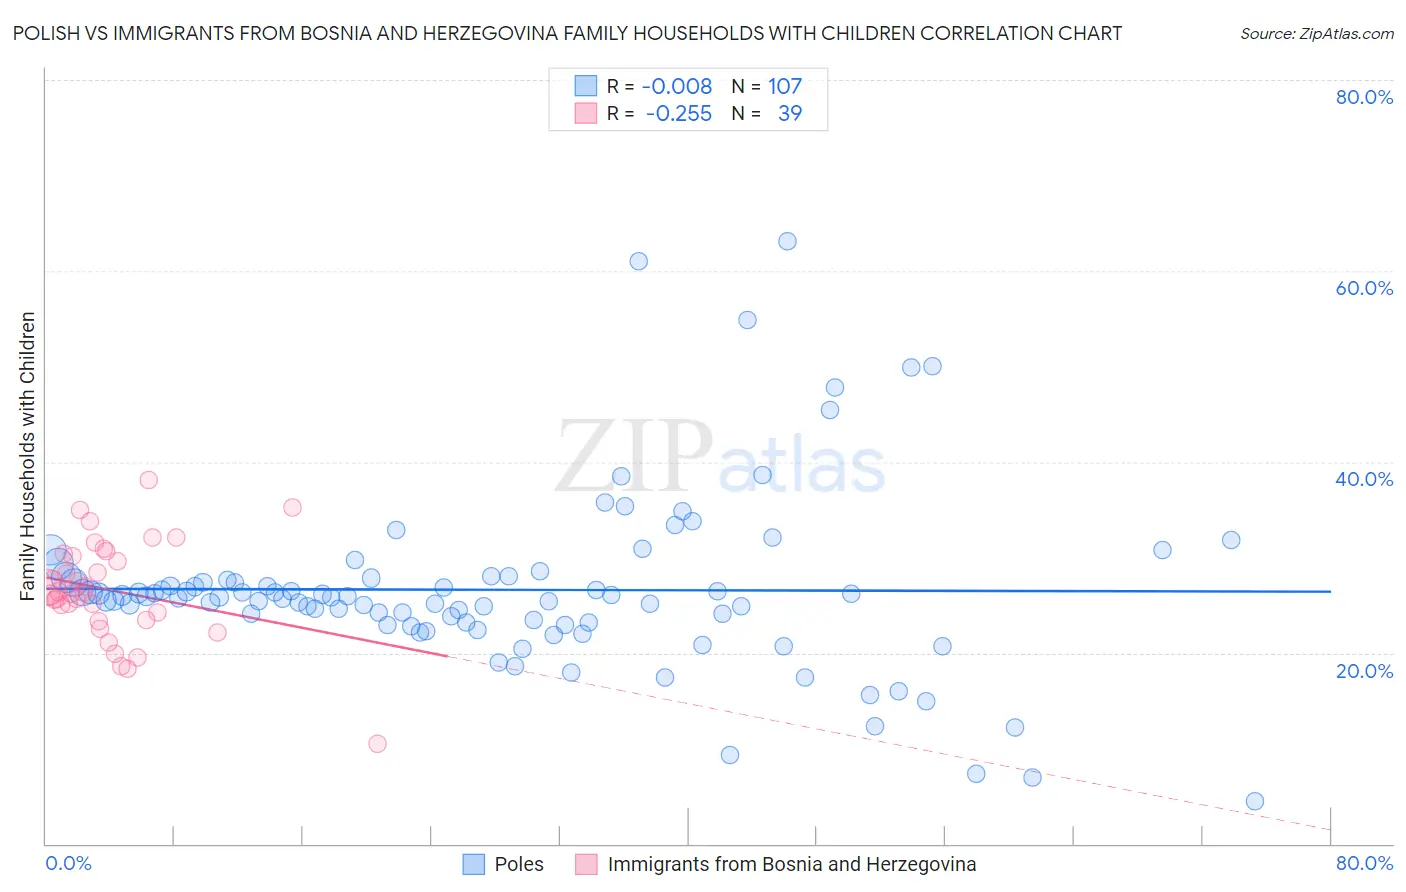 Polish vs Immigrants from Bosnia and Herzegovina Family Households with Children